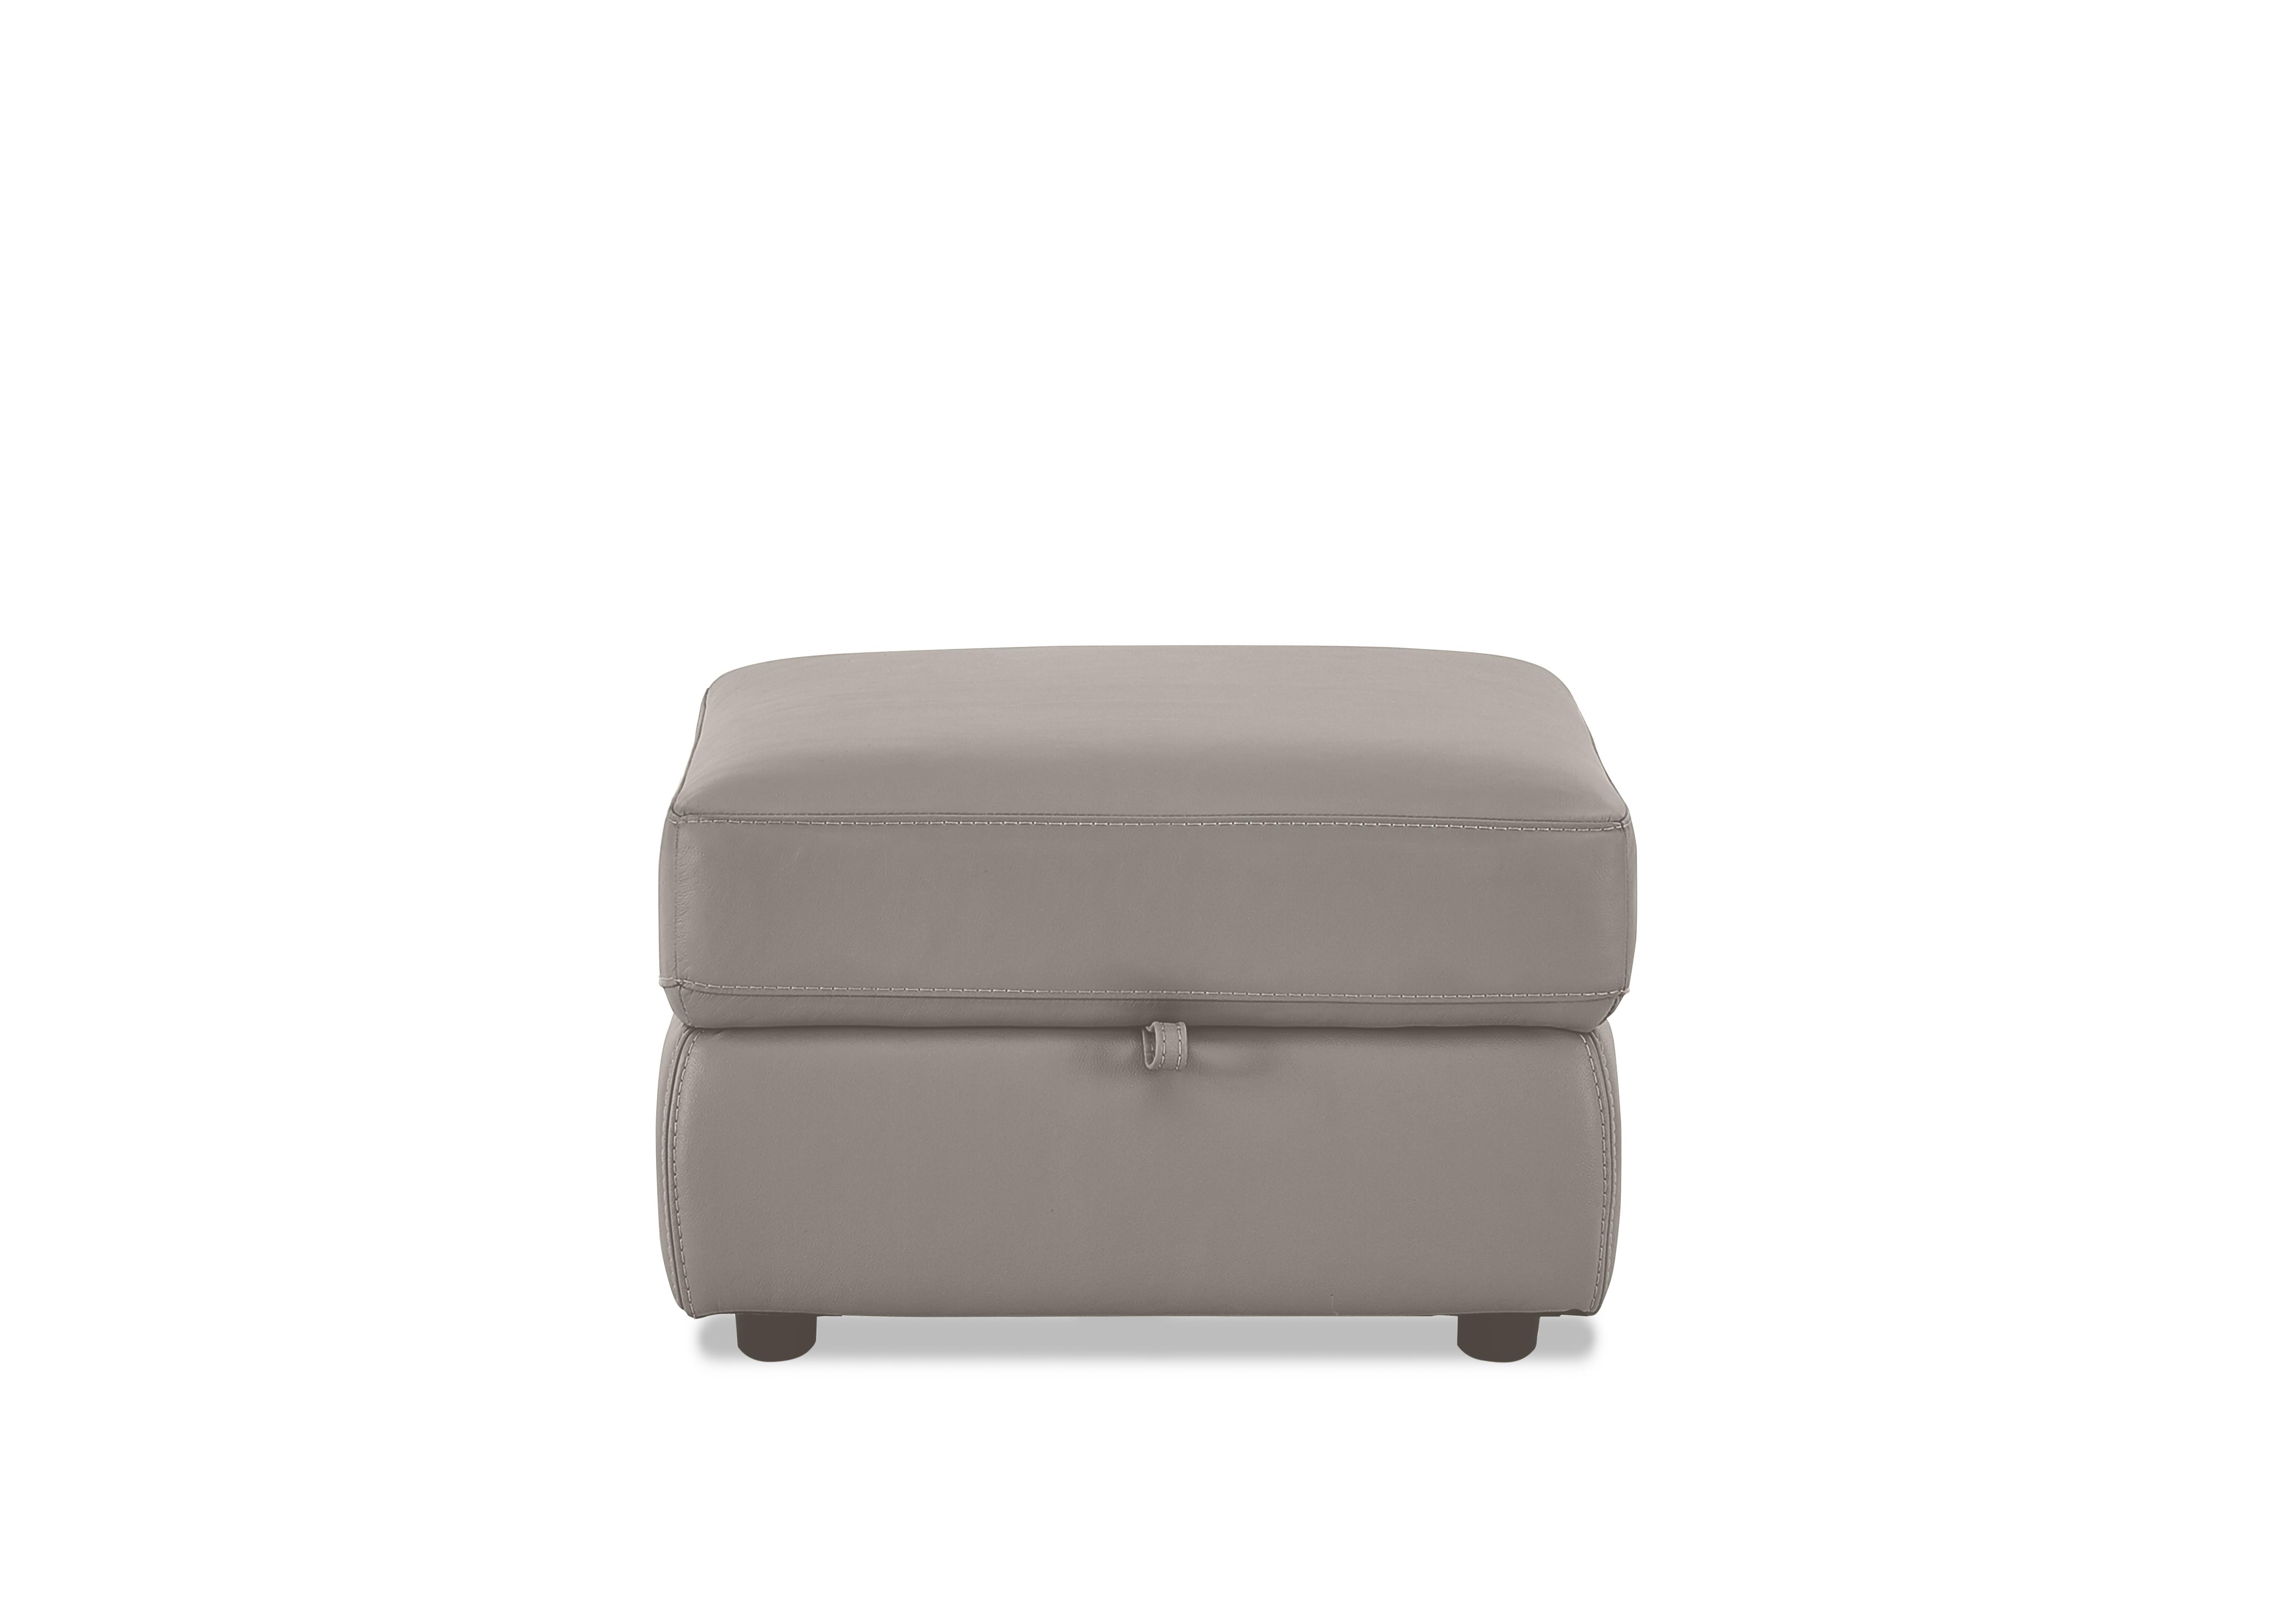 Touch Leather Storage Footstool in Bv-946b Silver Grey on Furniture Village